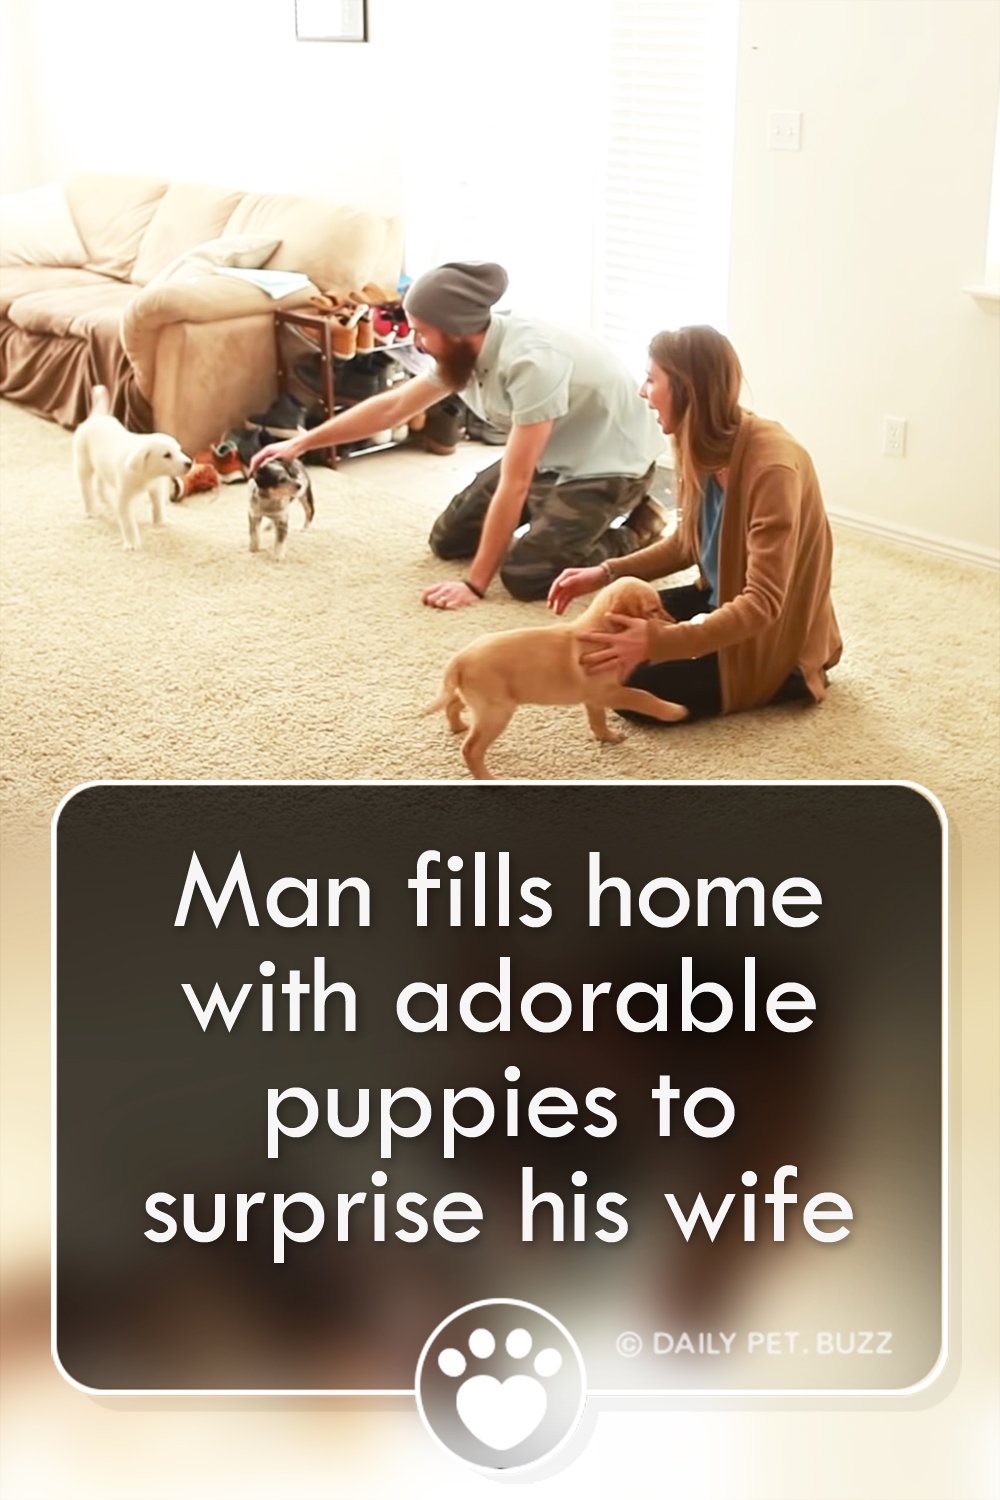 Man fills home with adorable puppies to surprise his wife